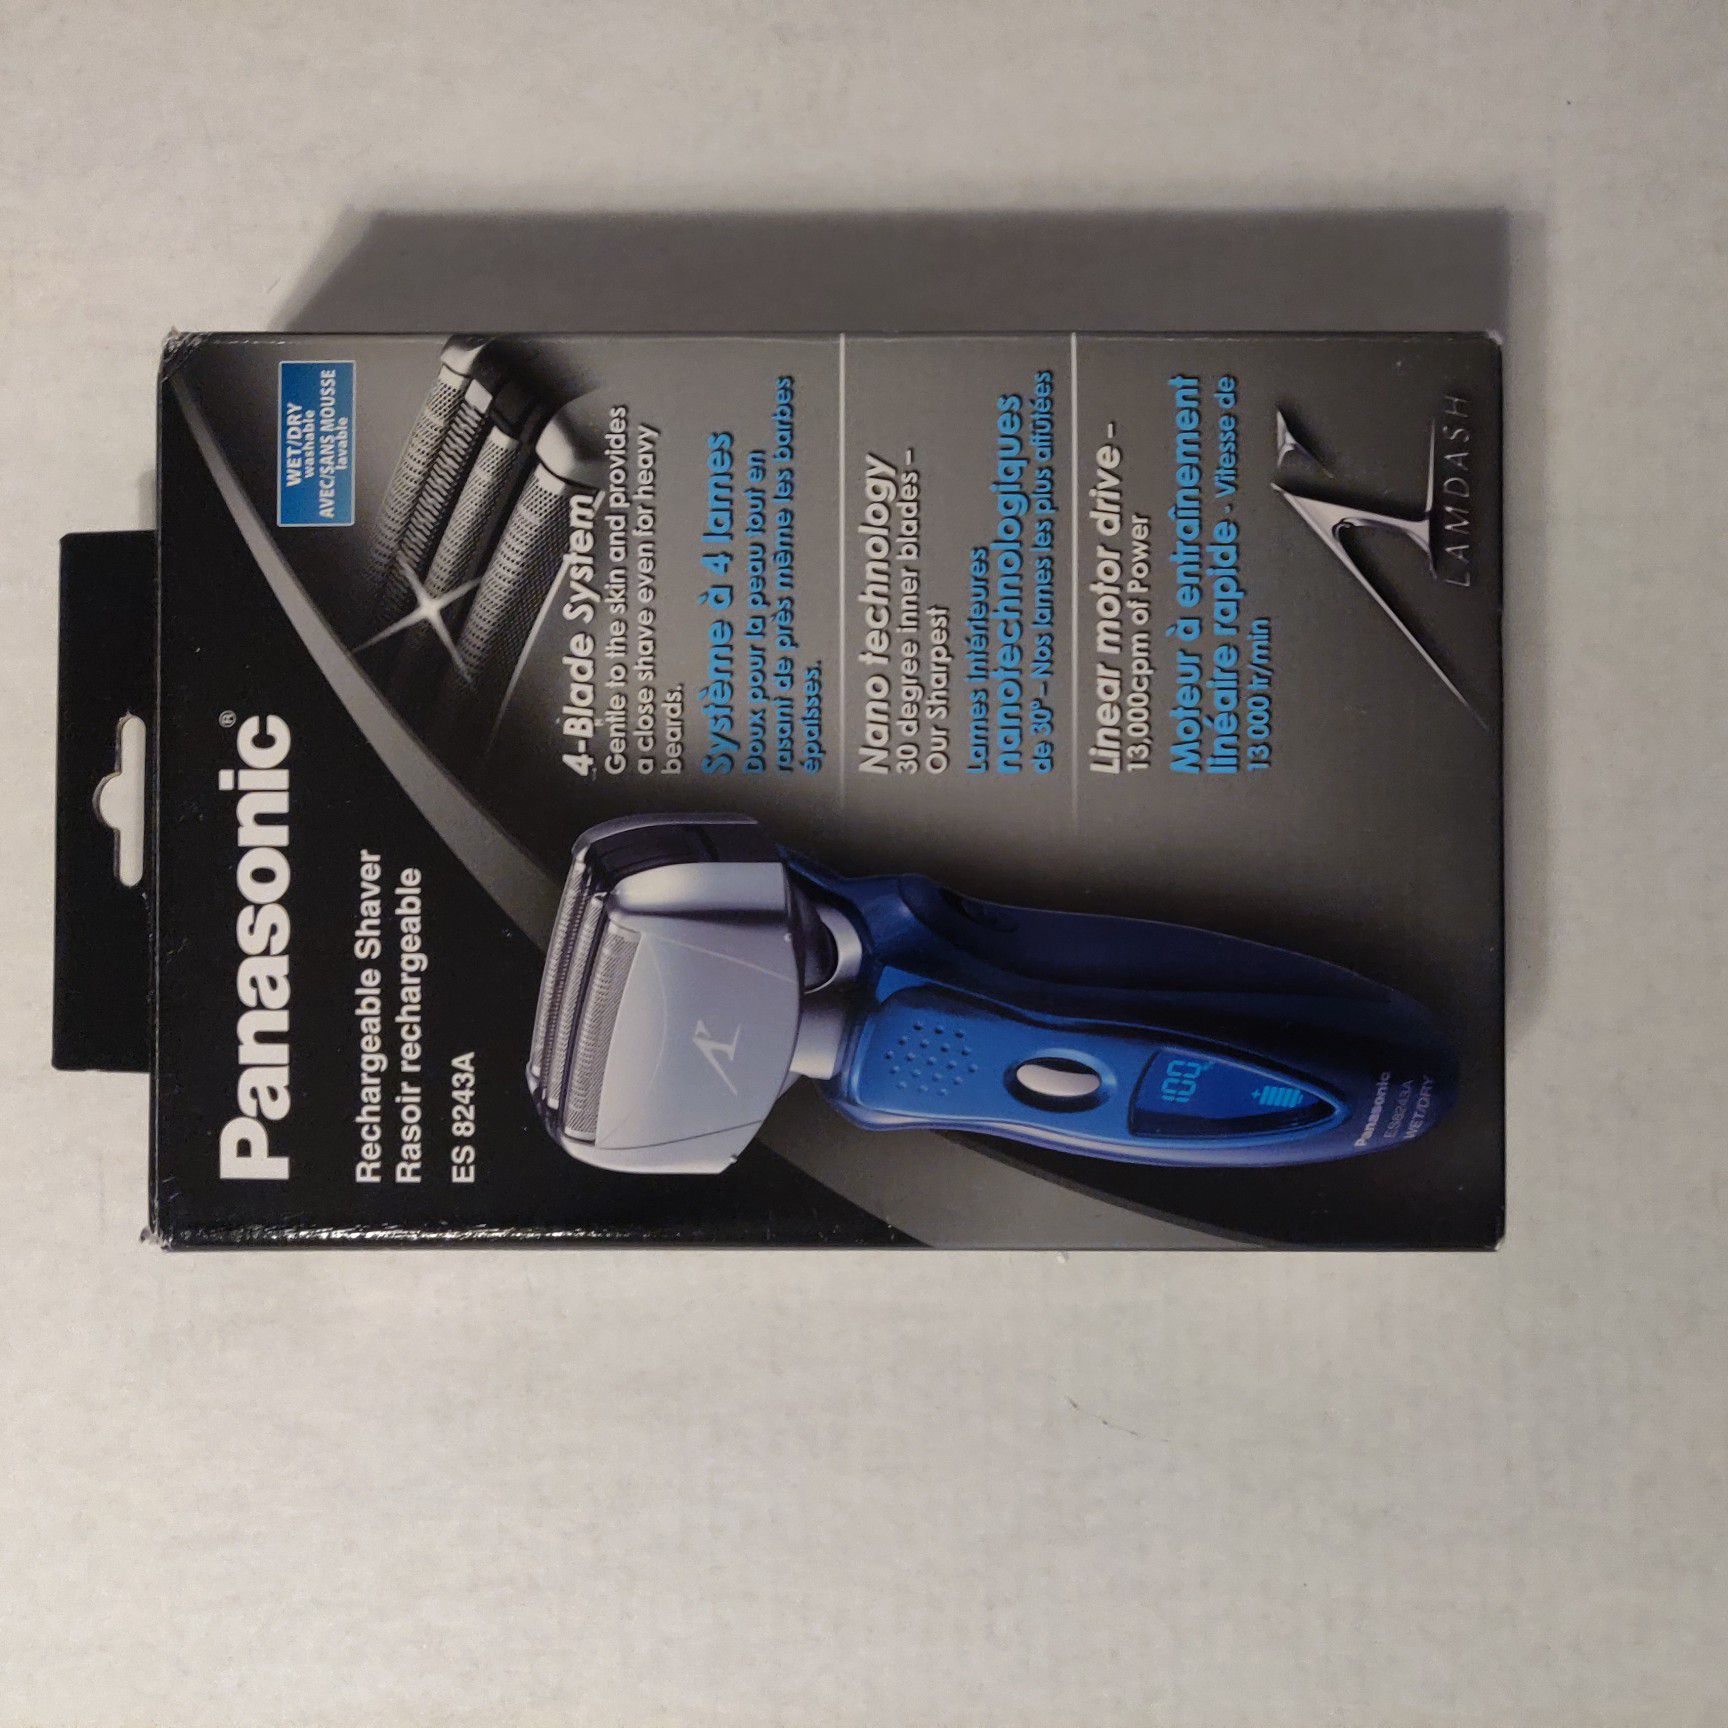 Panasonic Arc4 Electric Razor for Men with Pop-Up Beard Trimmer,